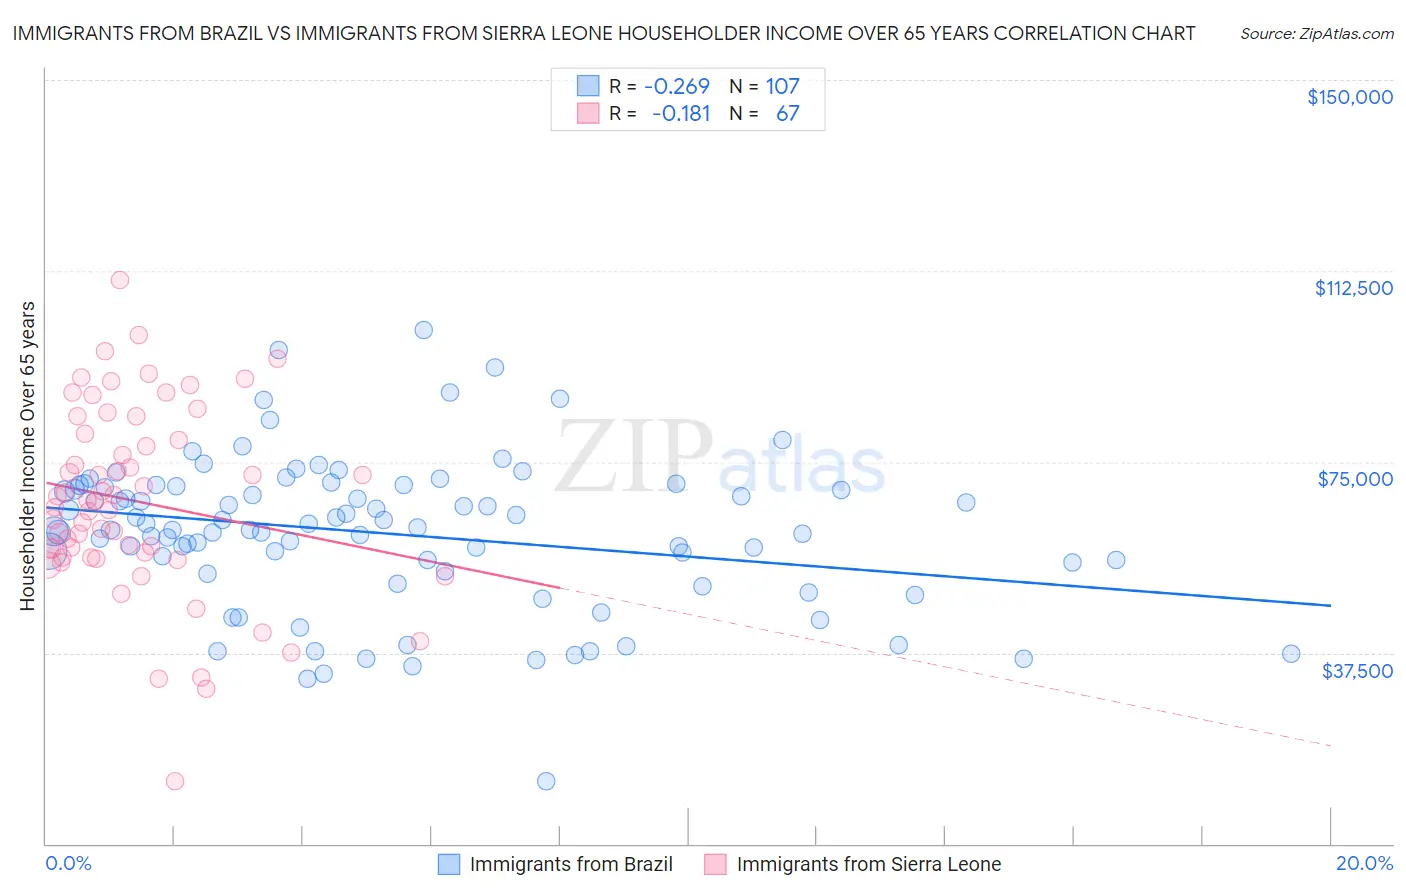 Immigrants from Brazil vs Immigrants from Sierra Leone Householder Income Over 65 years